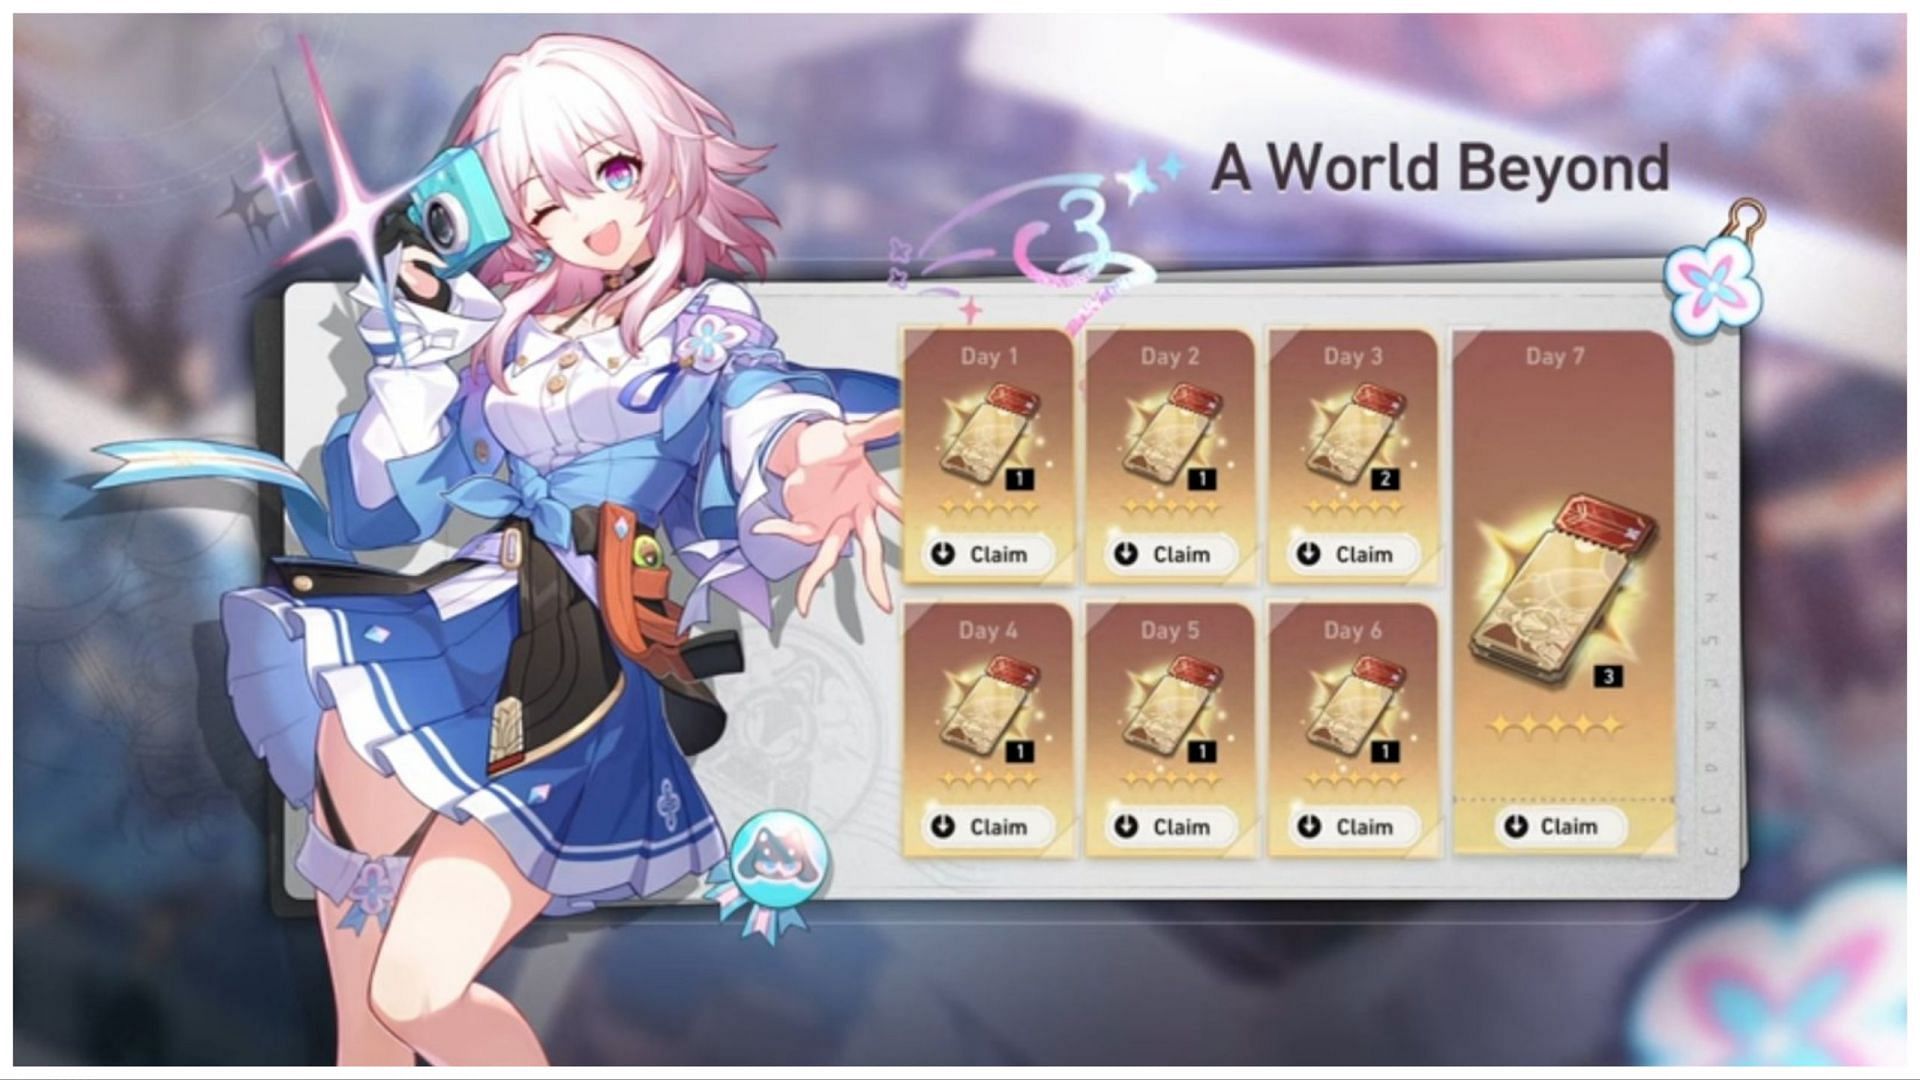 Log-in rewards collectively 10 pulls throughout 7 days (Image via Honkai Star Rail)